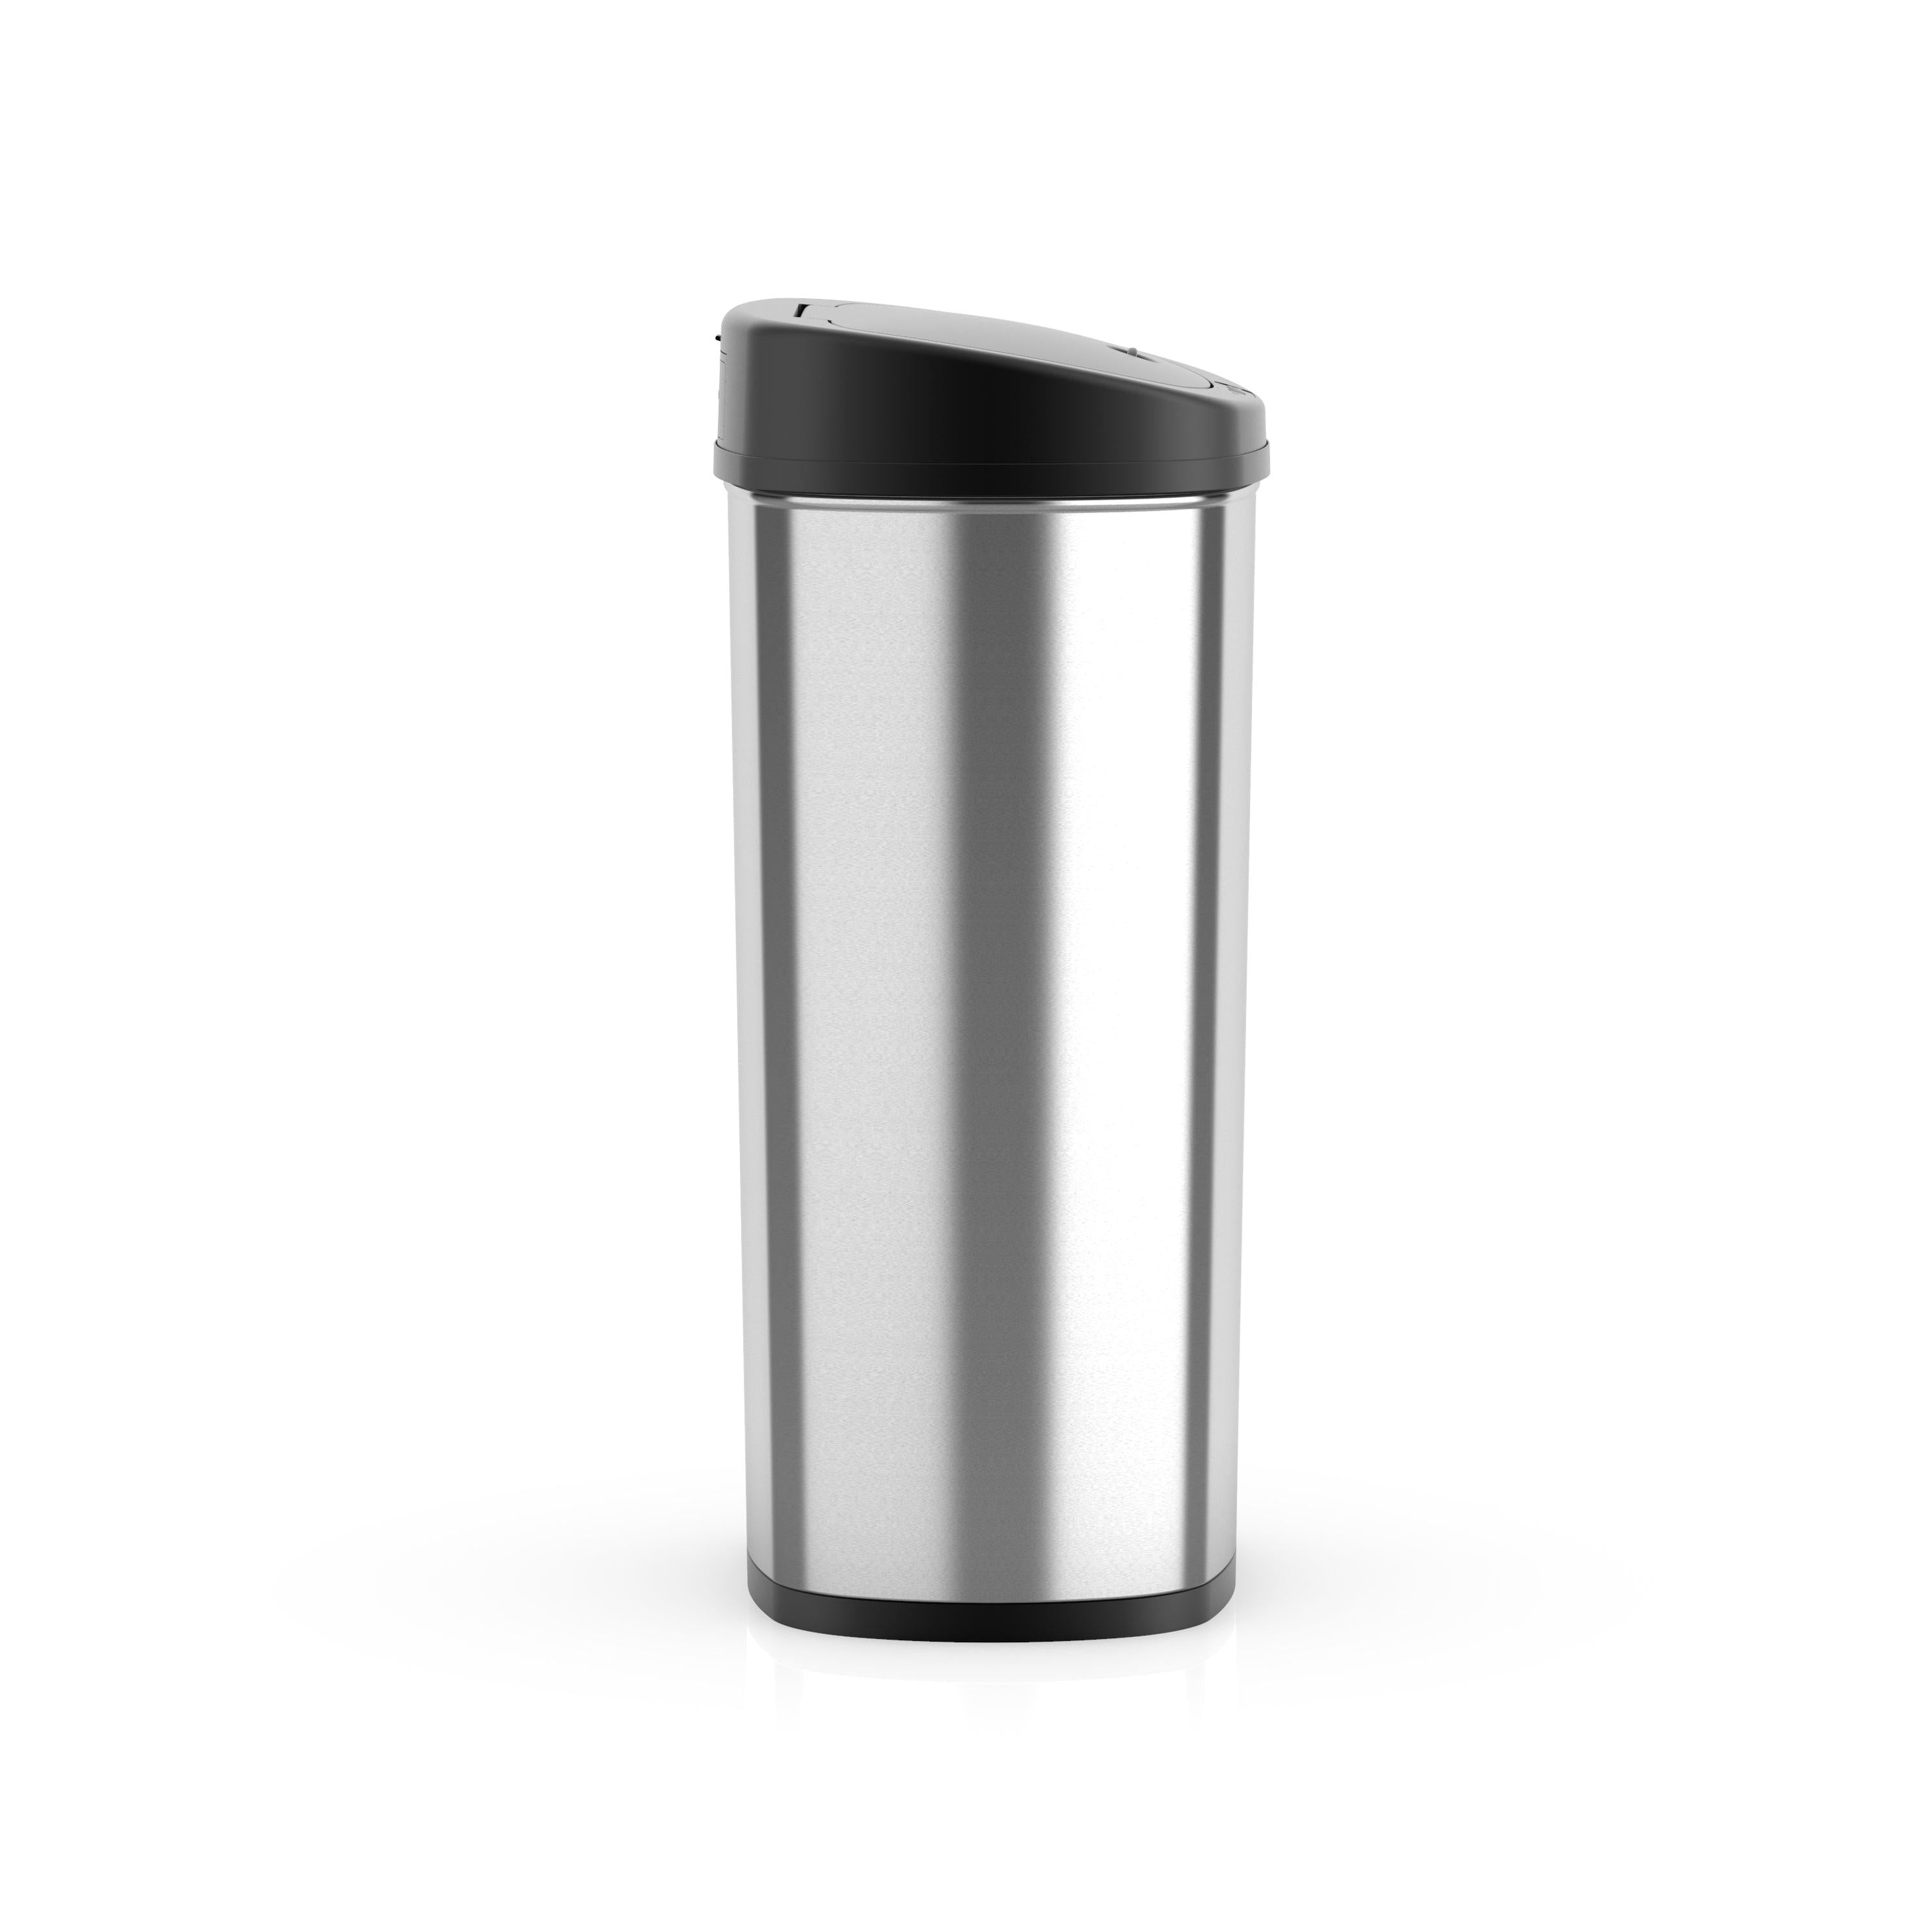 13.2 Gal/50 L Motion Sensor Kitchen Garbage Can, Stainless Steel - Etyn Online {{ product_tag }}